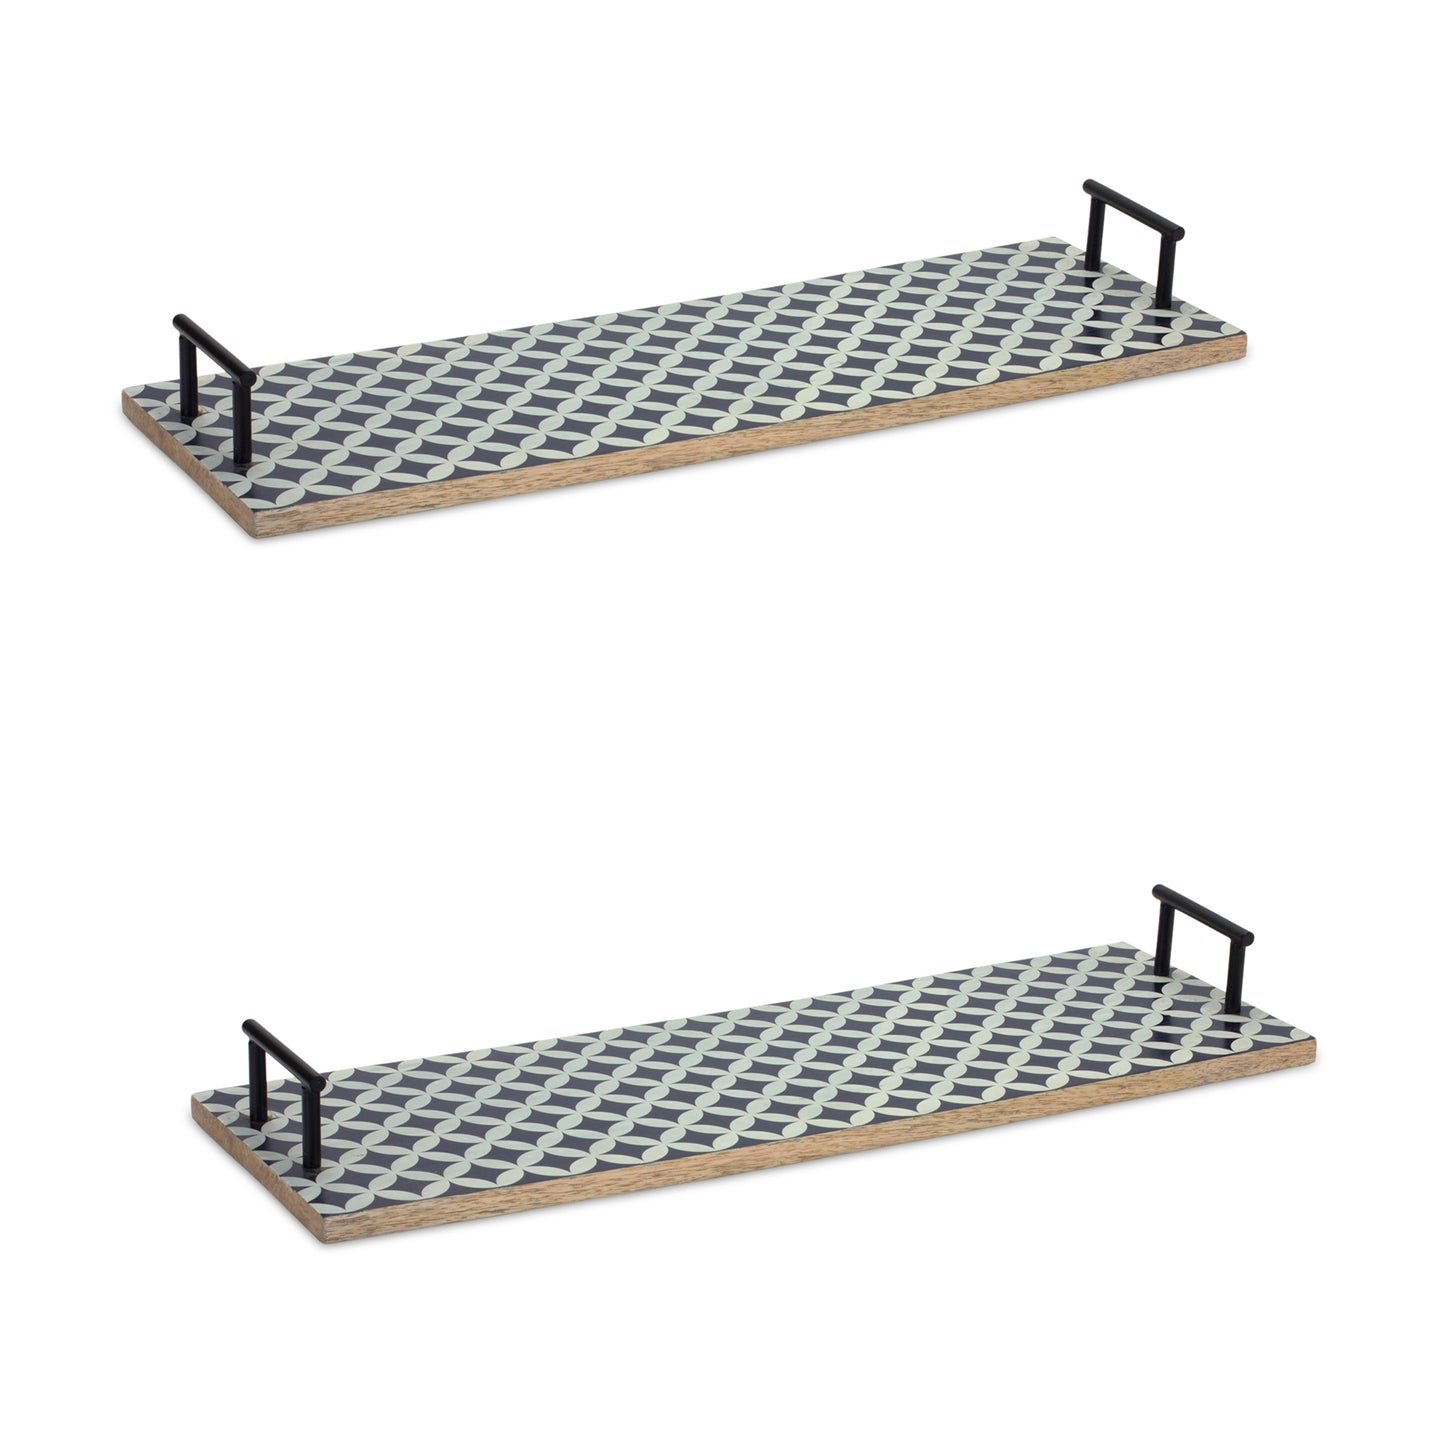 Mango Wood Tray with Geometric Design and Metal Handle Accents (Set of 2)